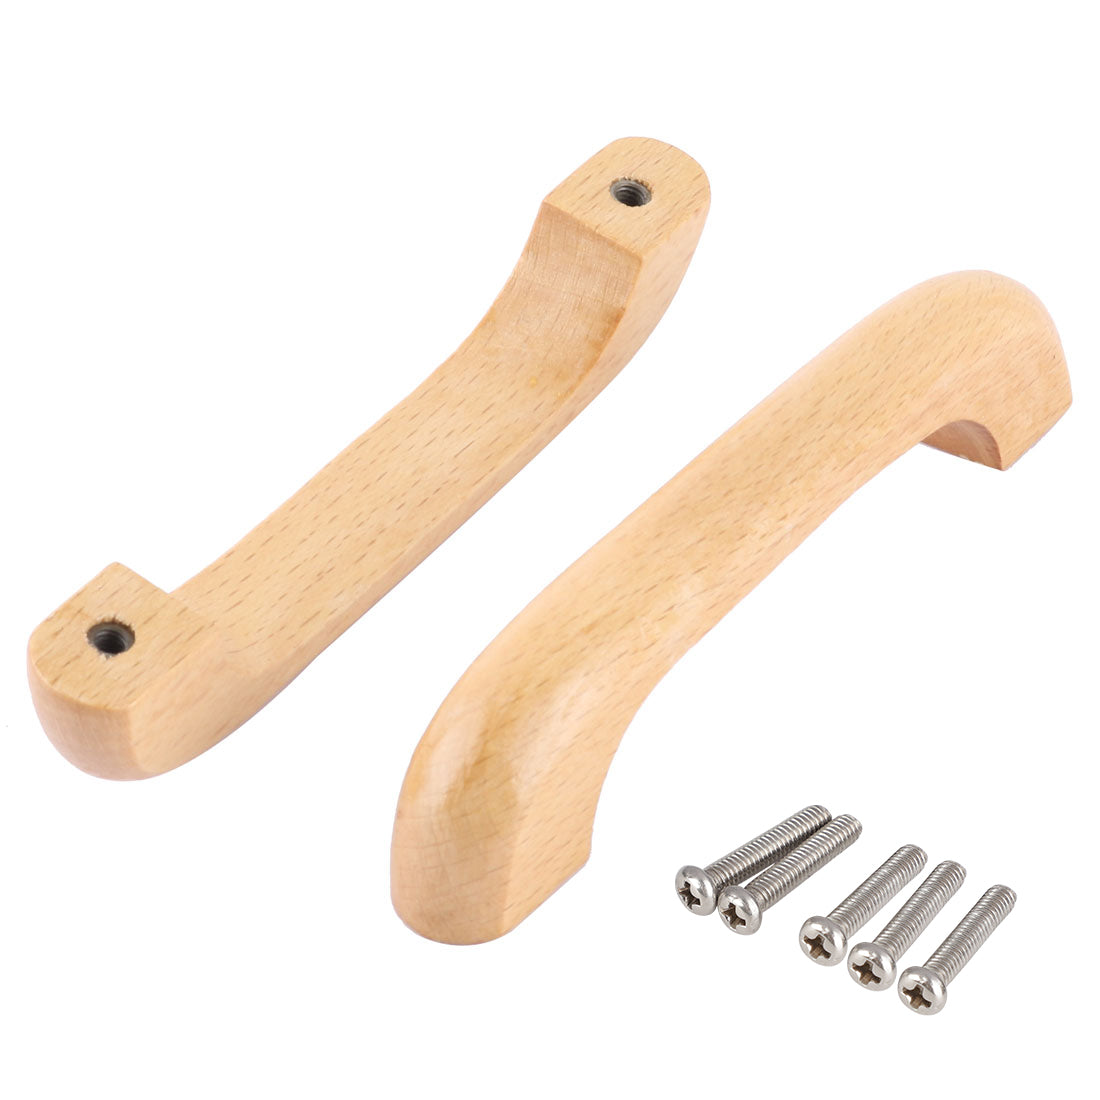 uxcell Uxcell Family Wood Door Cabinet Dresser Drawer Replacement Pull Handle Handgrip 2 Pcs